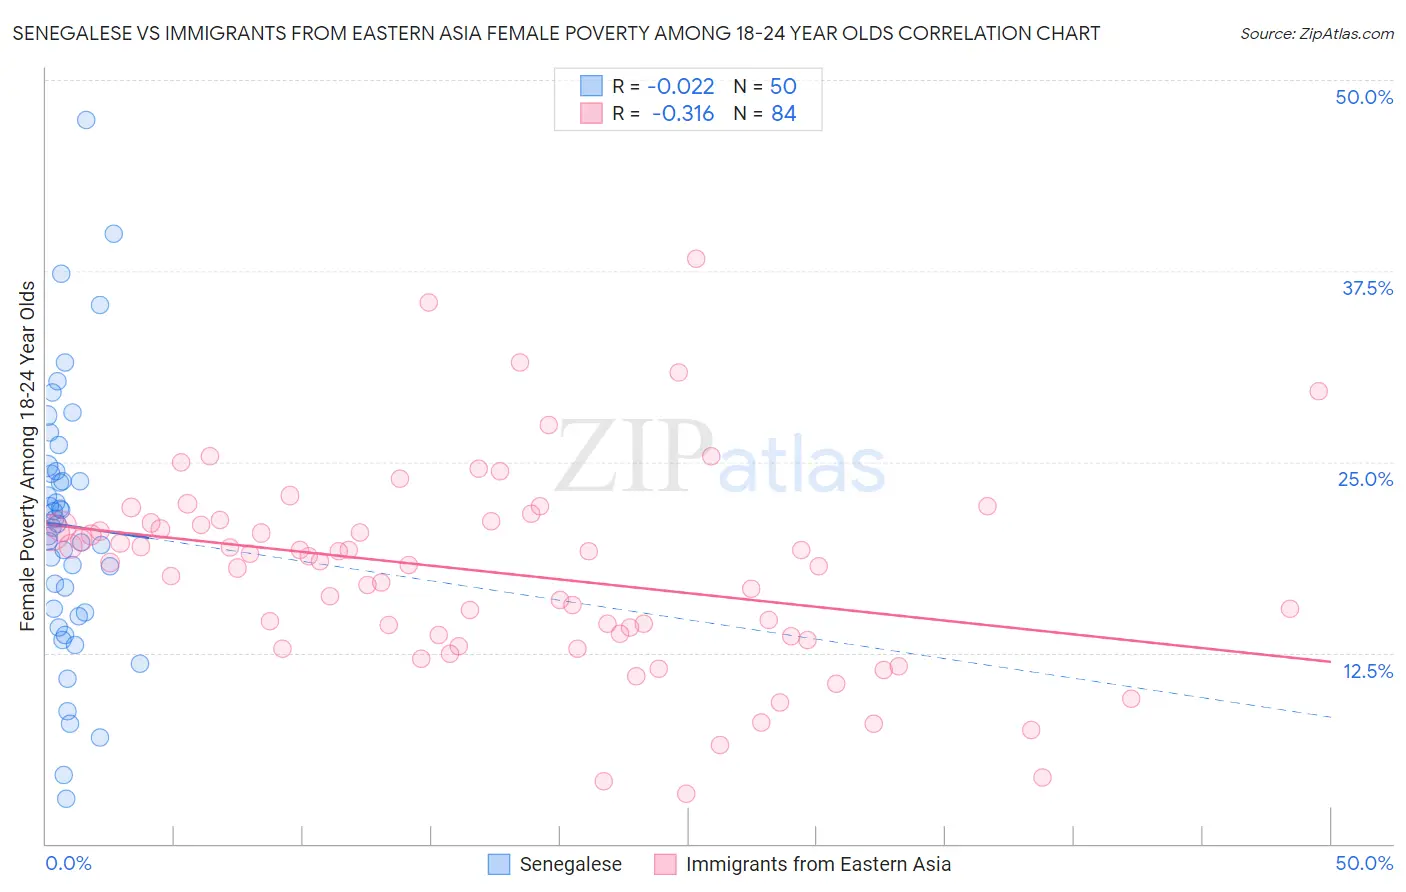 Senegalese vs Immigrants from Eastern Asia Female Poverty Among 18-24 Year Olds